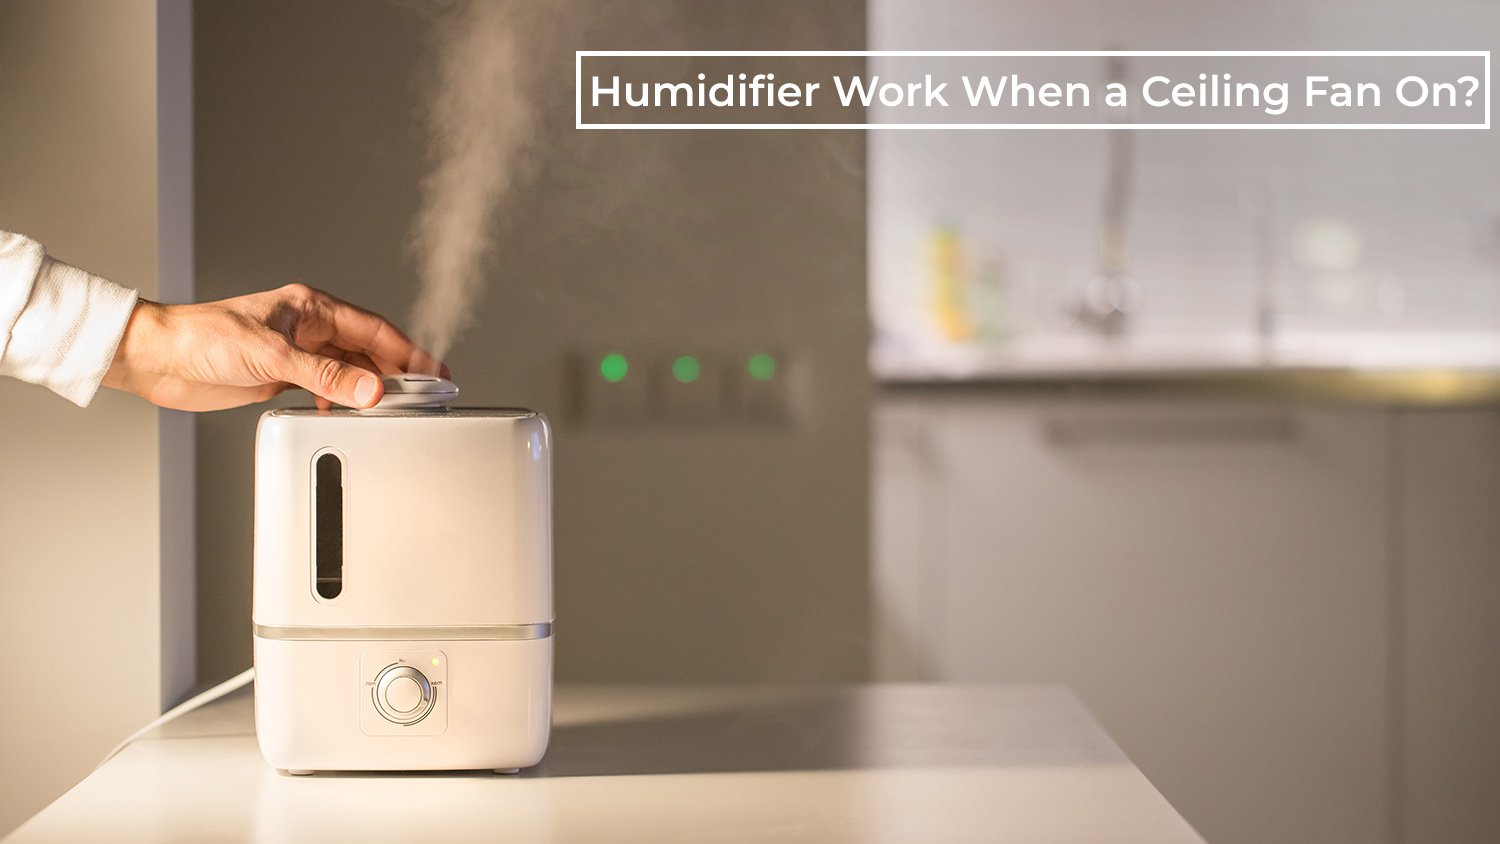 Will a Humidifier Work with a Ceiling Fan On? How to Enhance Air Quality and Room Temperature